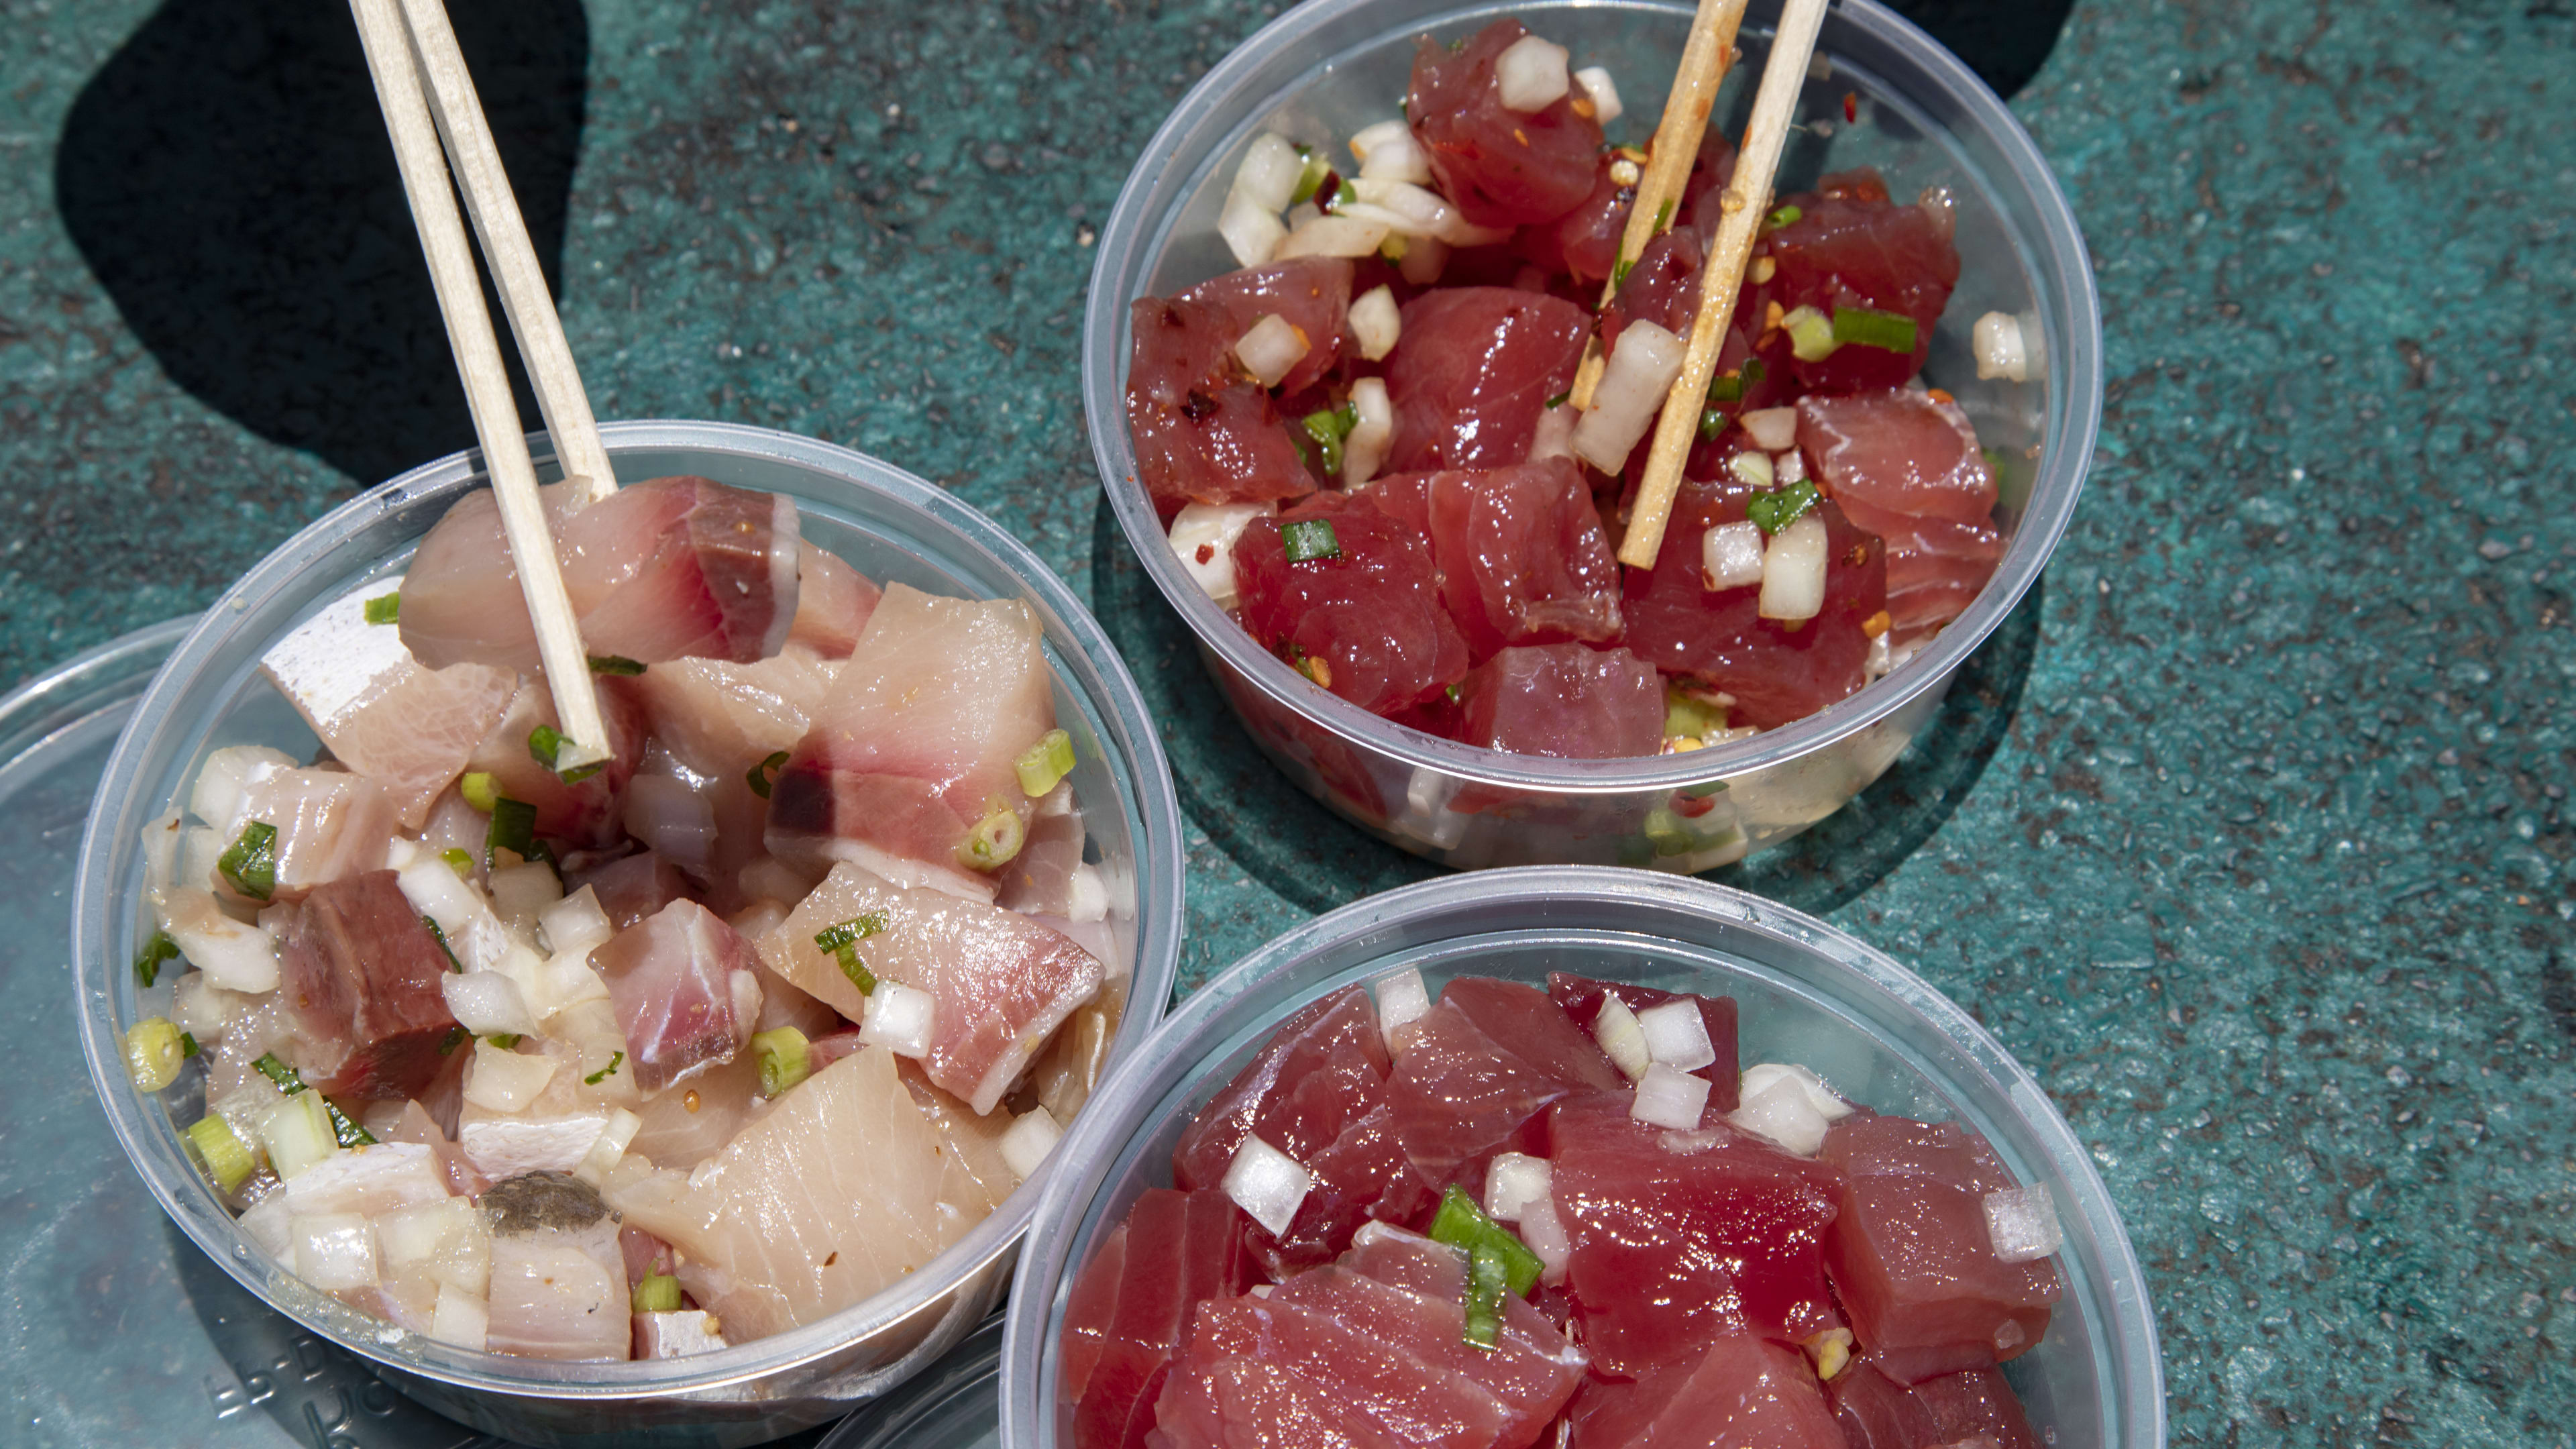 Poke from the Kaohu Store in Maui